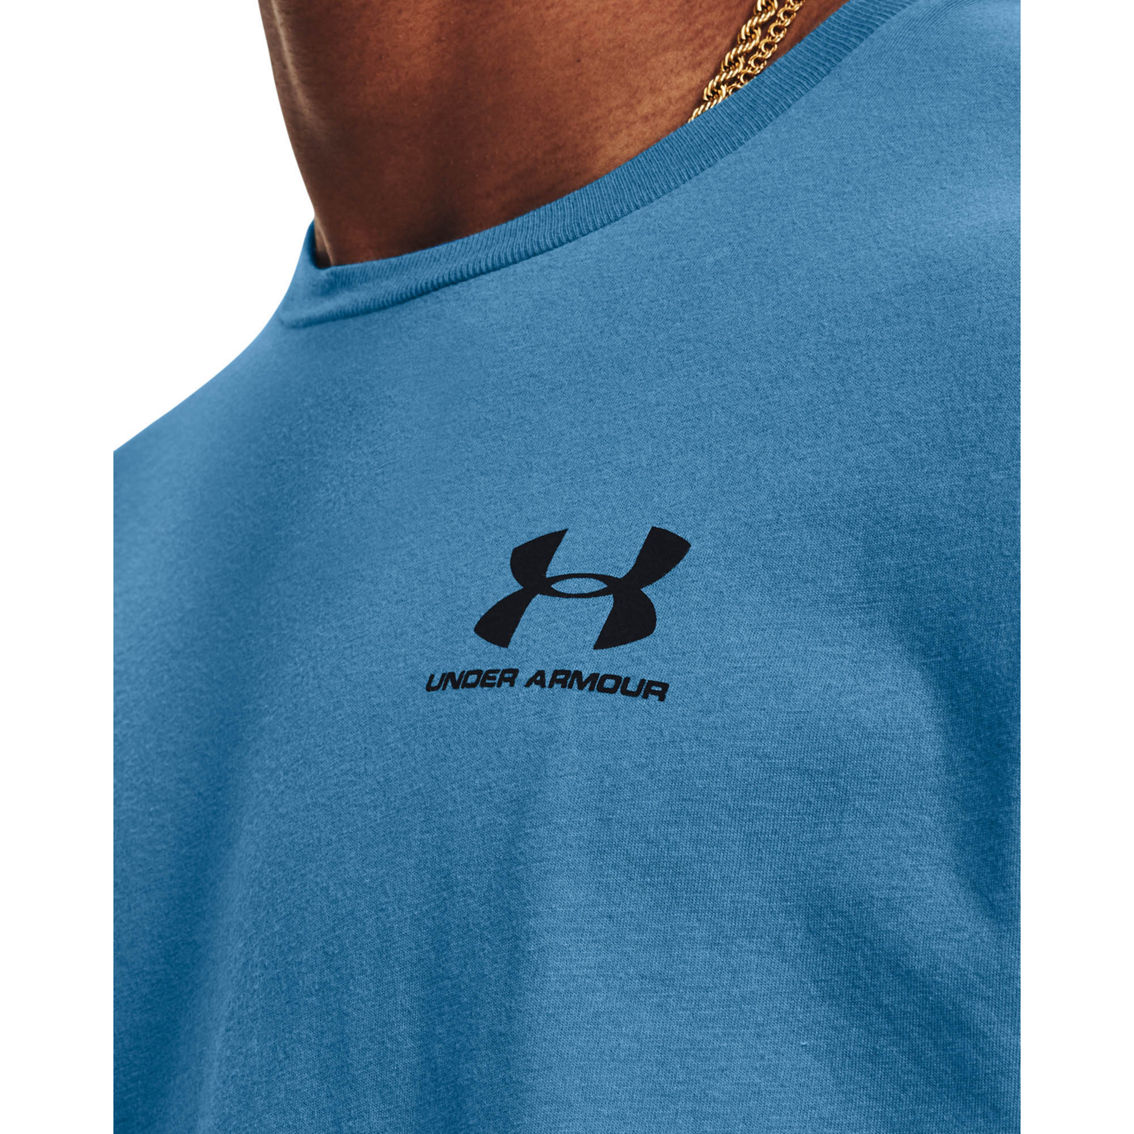 Under Armour Sportstyle Left Chest Shirt | Shirts | Clothing ...